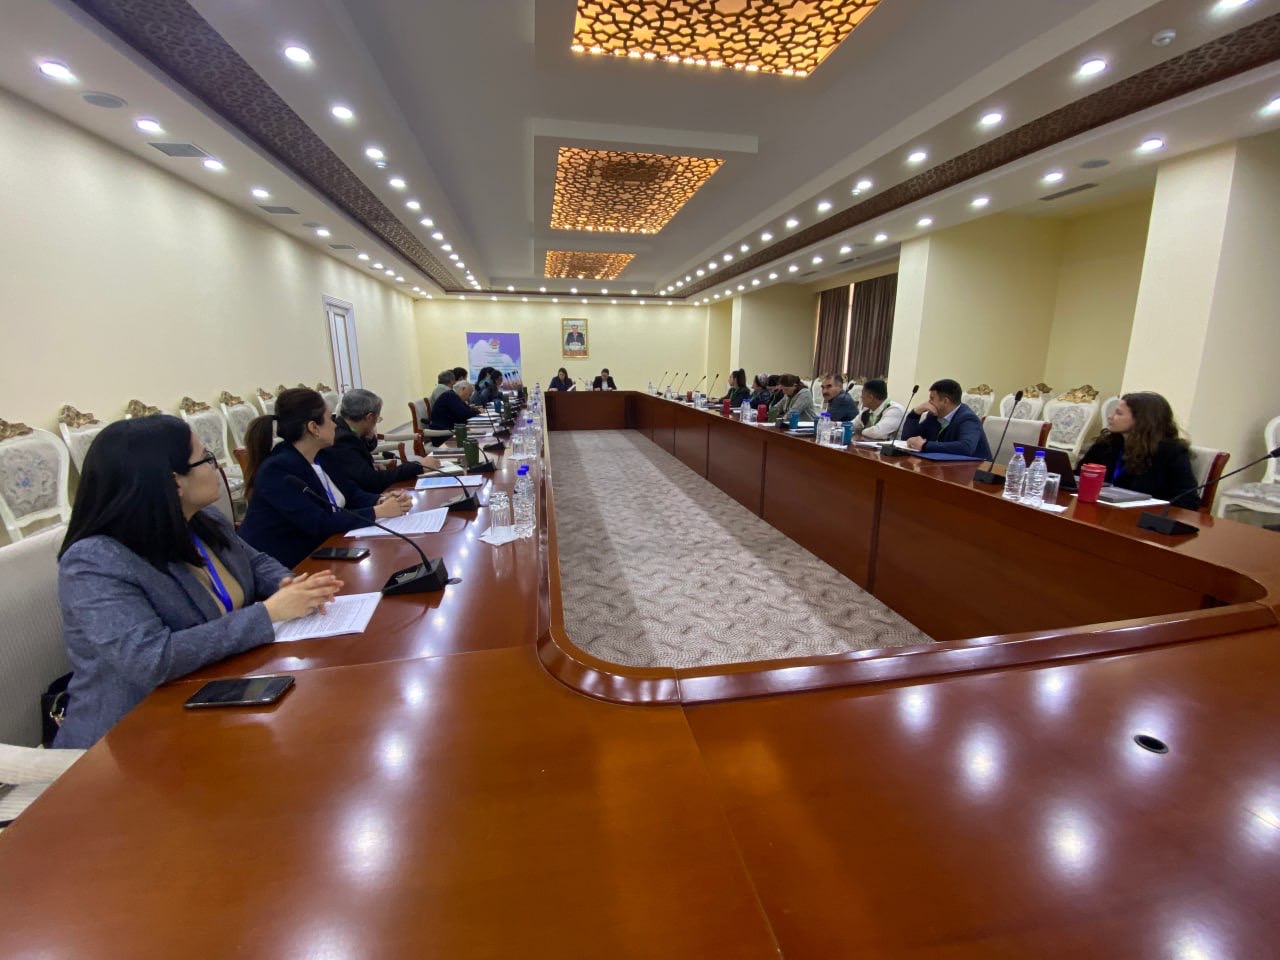 Local experts gather in Khujand for hands-on sessions, leveraging advanced methods to assess Tajikistan's cultural treasures